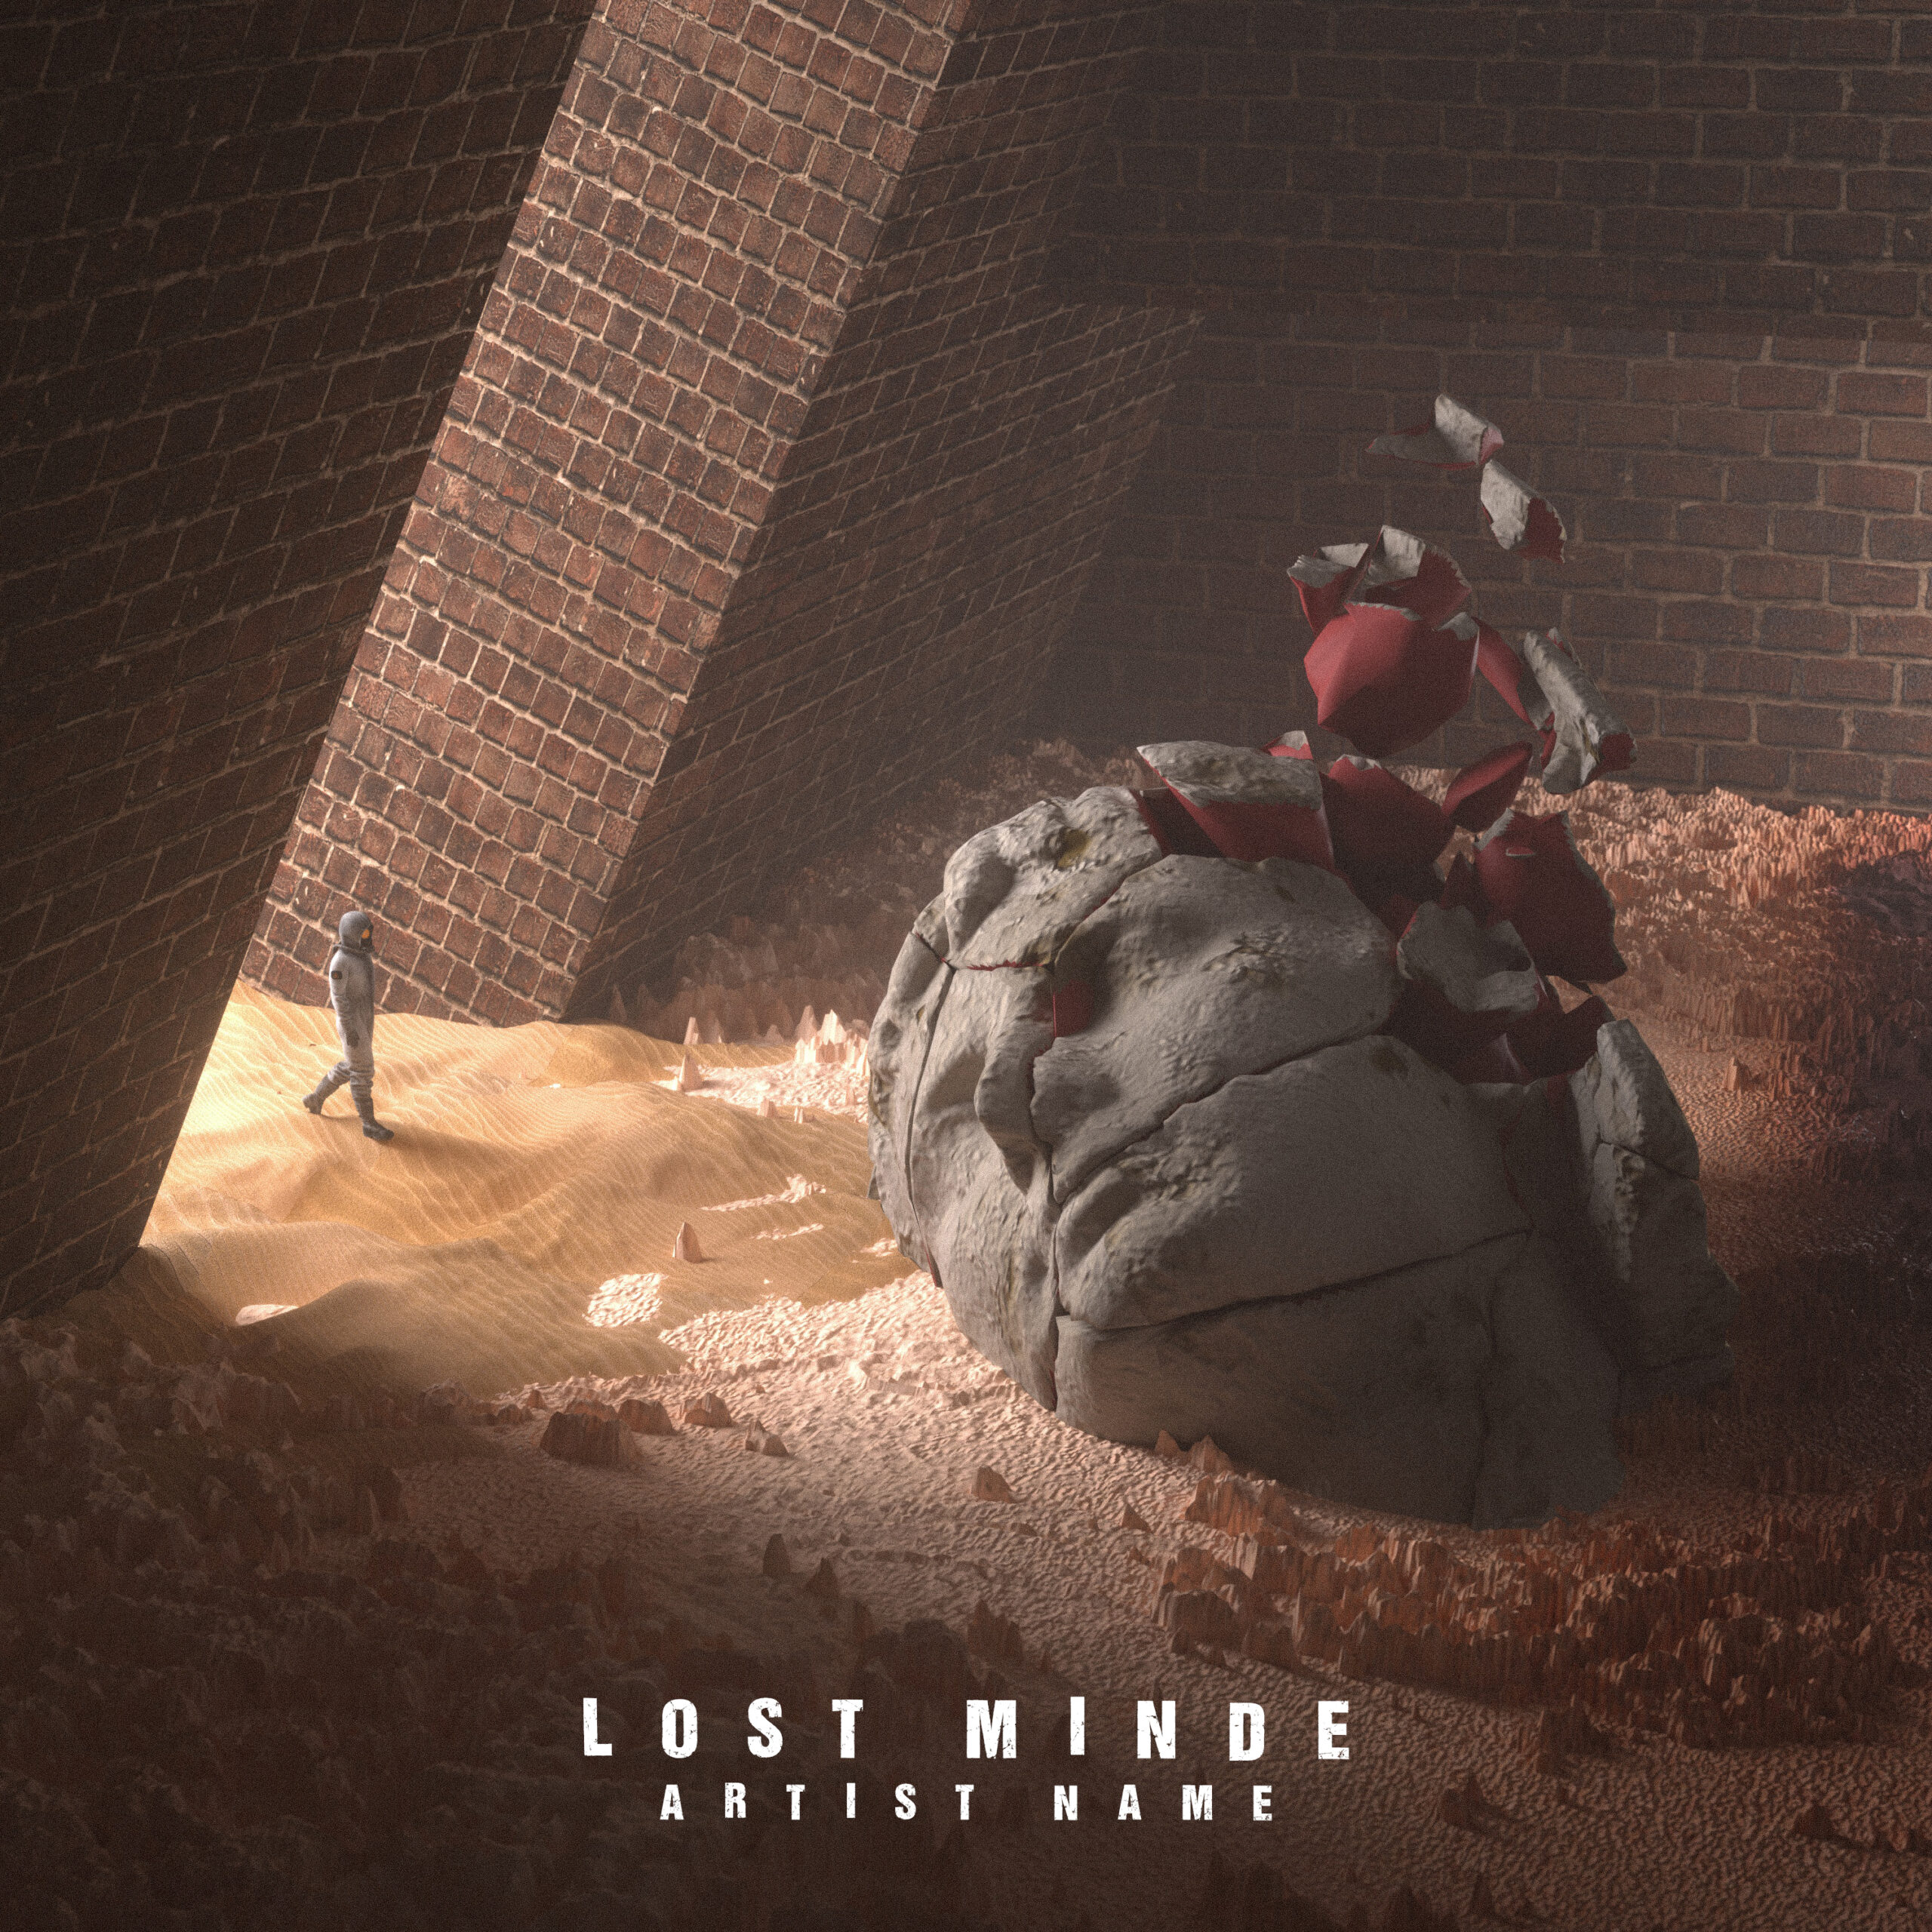 Lost Minde premade Cover Art is available for digital download, designed to fit album covers, singles, EPs, or mixtapes. Our pre-made album arts are fully prepared for purchase and come with a fast delivery guarantee.